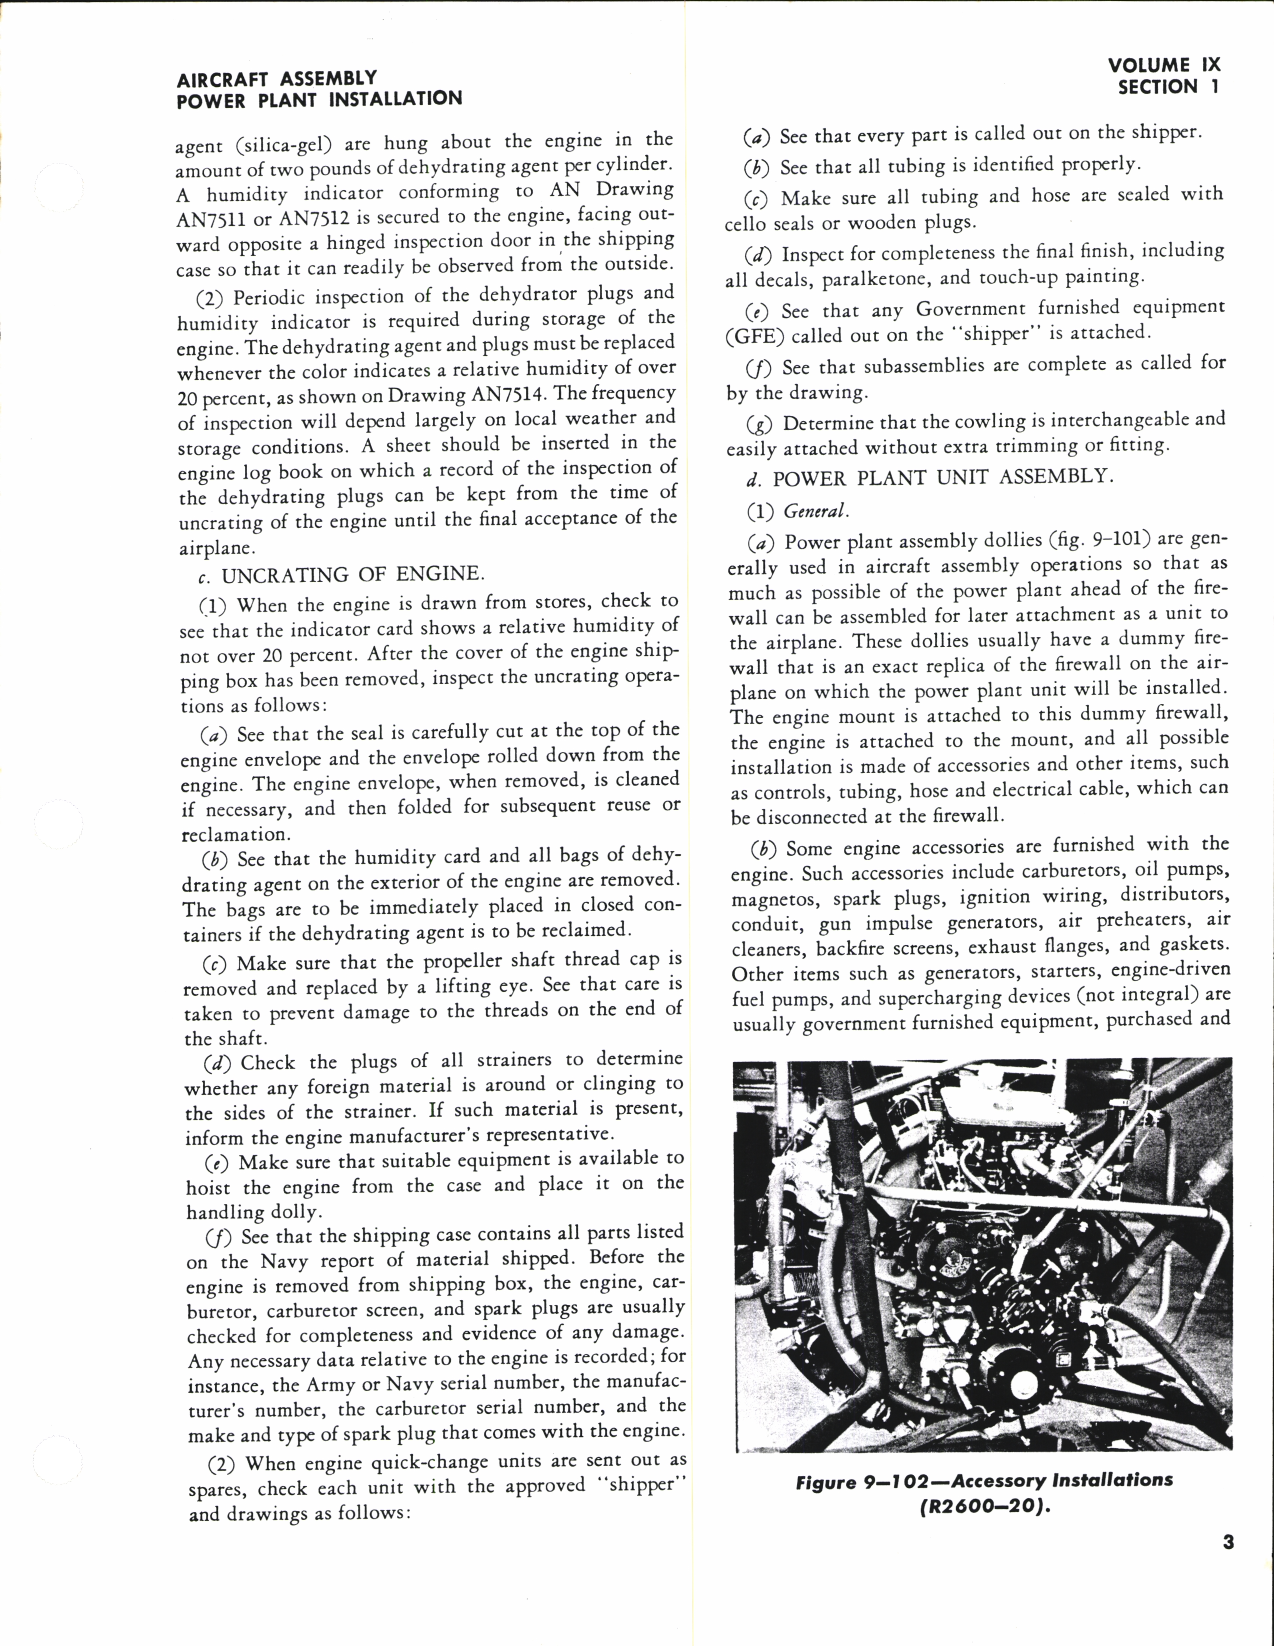 Sample page 7 from AirCorps Library document: Aeronautical Technical Inspection Manual Volume 9, Aircraft Assembly, Pre-Flight and After-Flight Inspection 